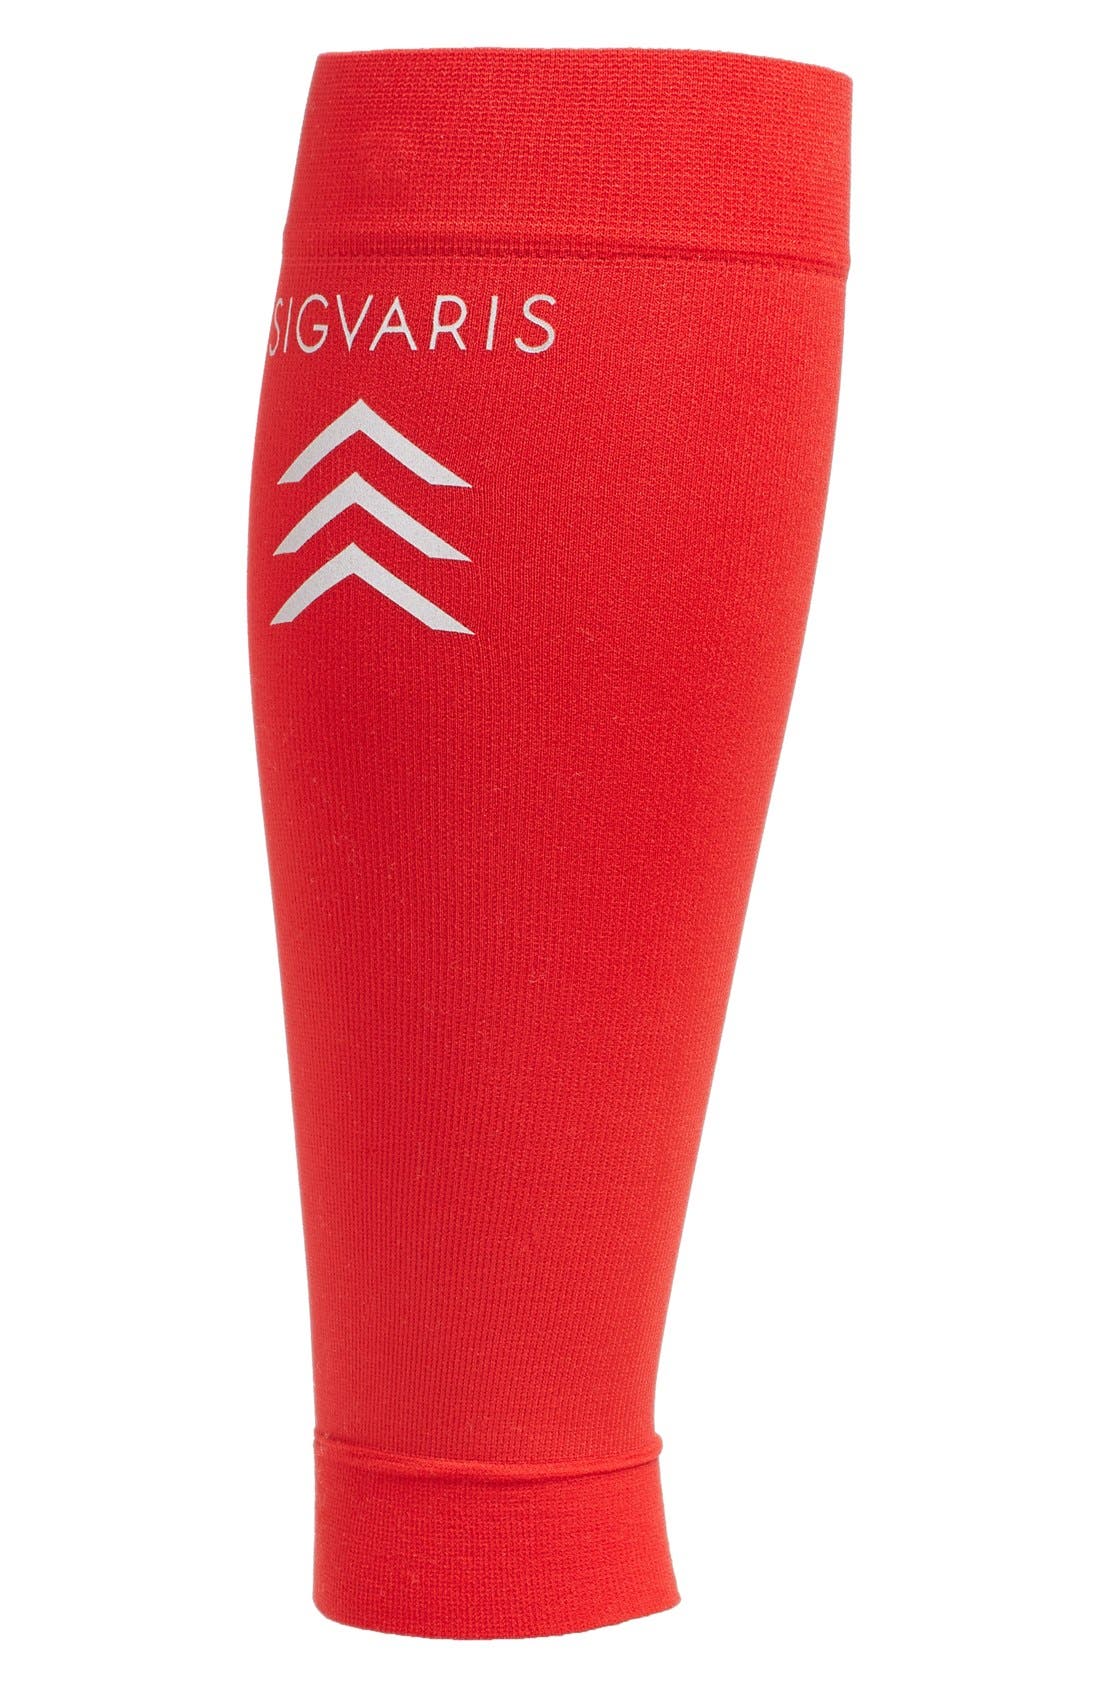 UPC 745129219918 product image for Men's Insignia By Sigvaris 'Sports' Graduated Compression Performance Calf Sleev | upcitemdb.com